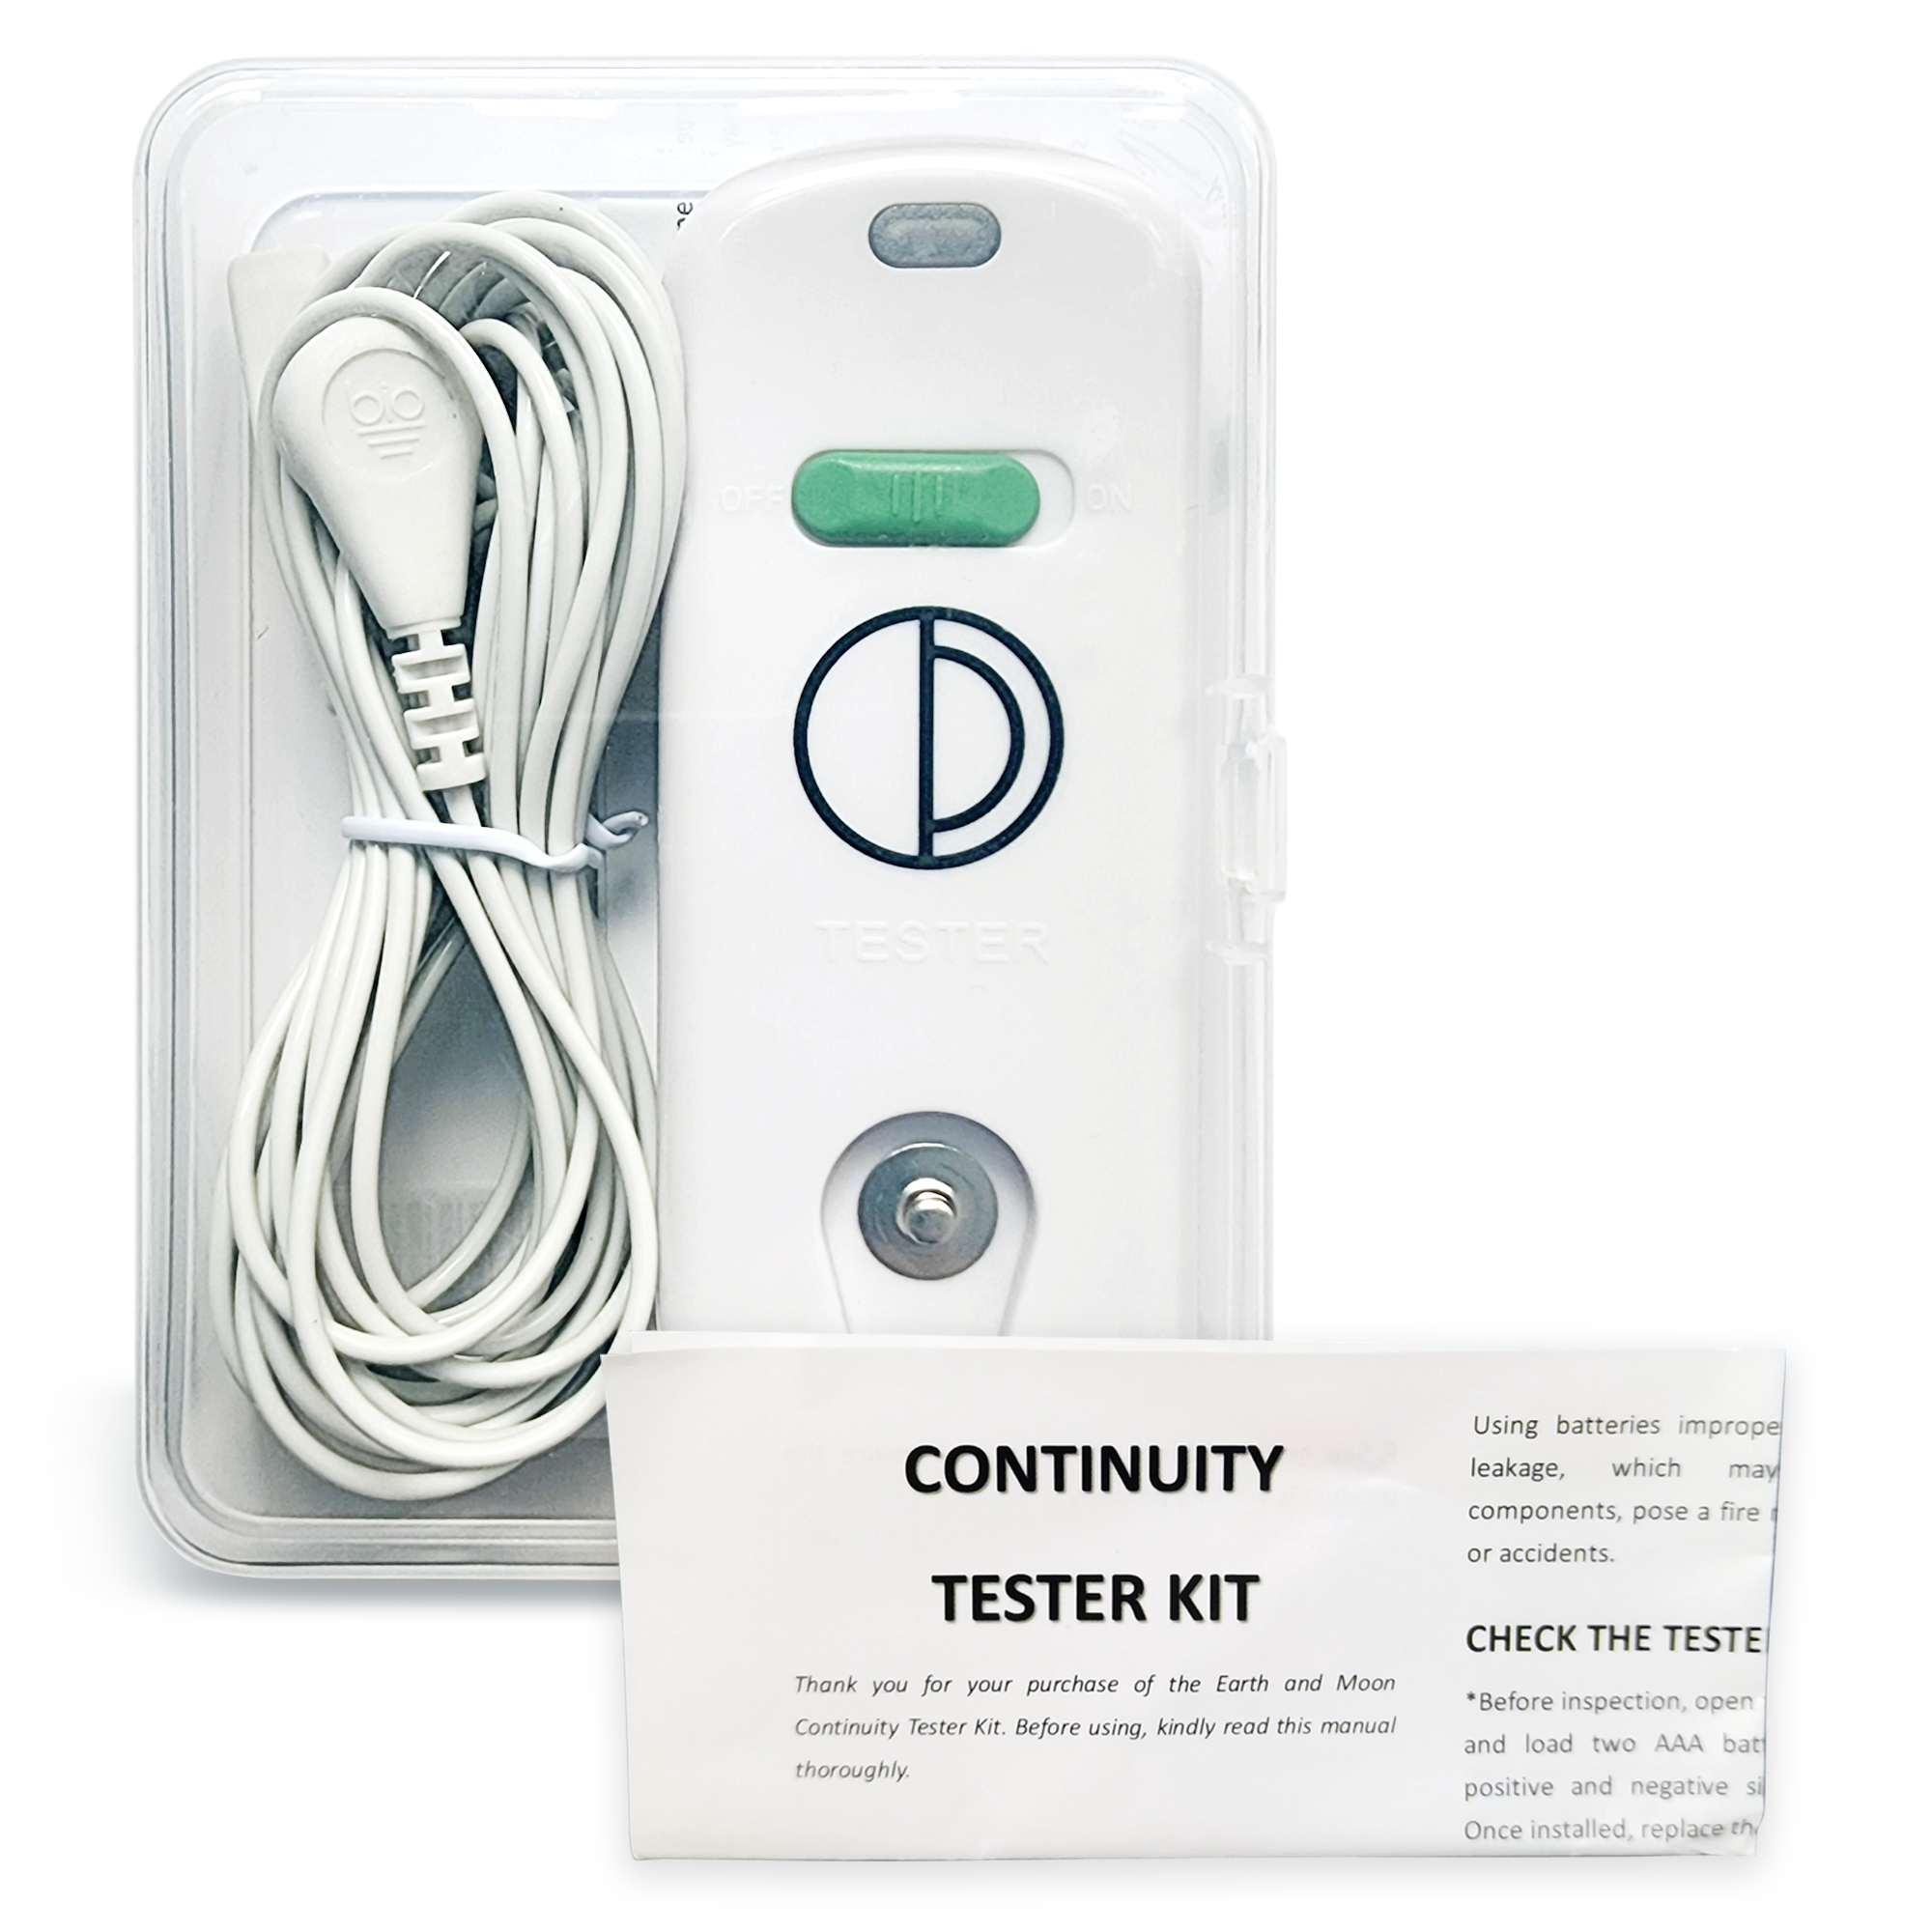 Earth and Moon Earthing Continuity Tester Kit with free grounding cord and easy to read manual